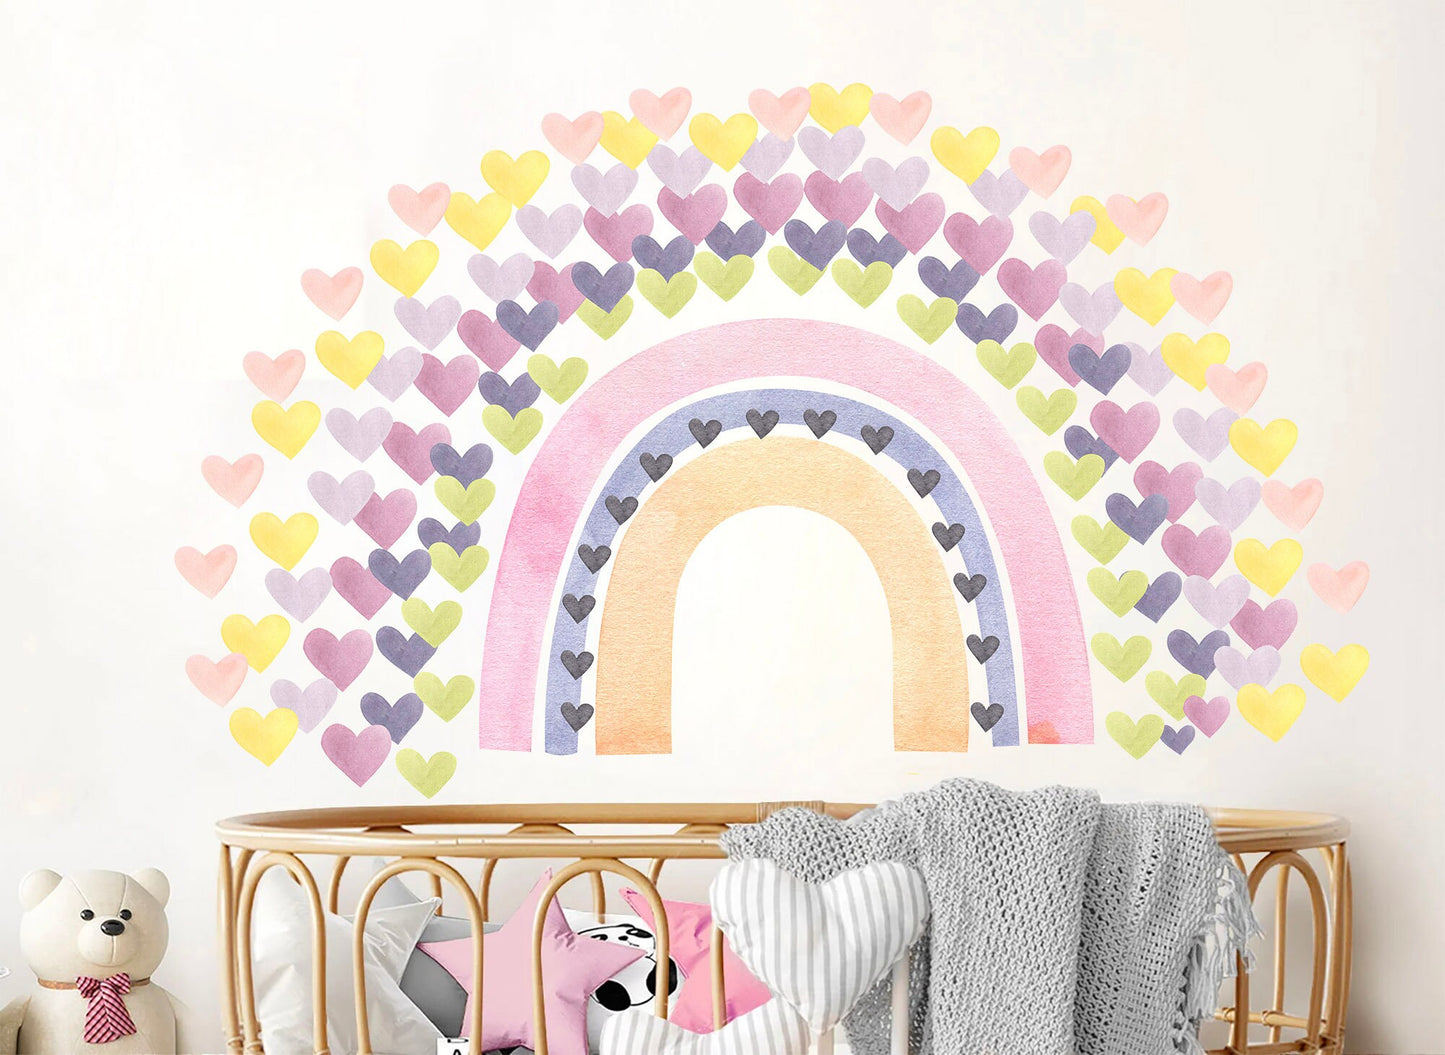 Vibrant Watercolor Heart Castle Wall Decal - Fun and Colorful - Ideal for Girls' Room Decor - BR281